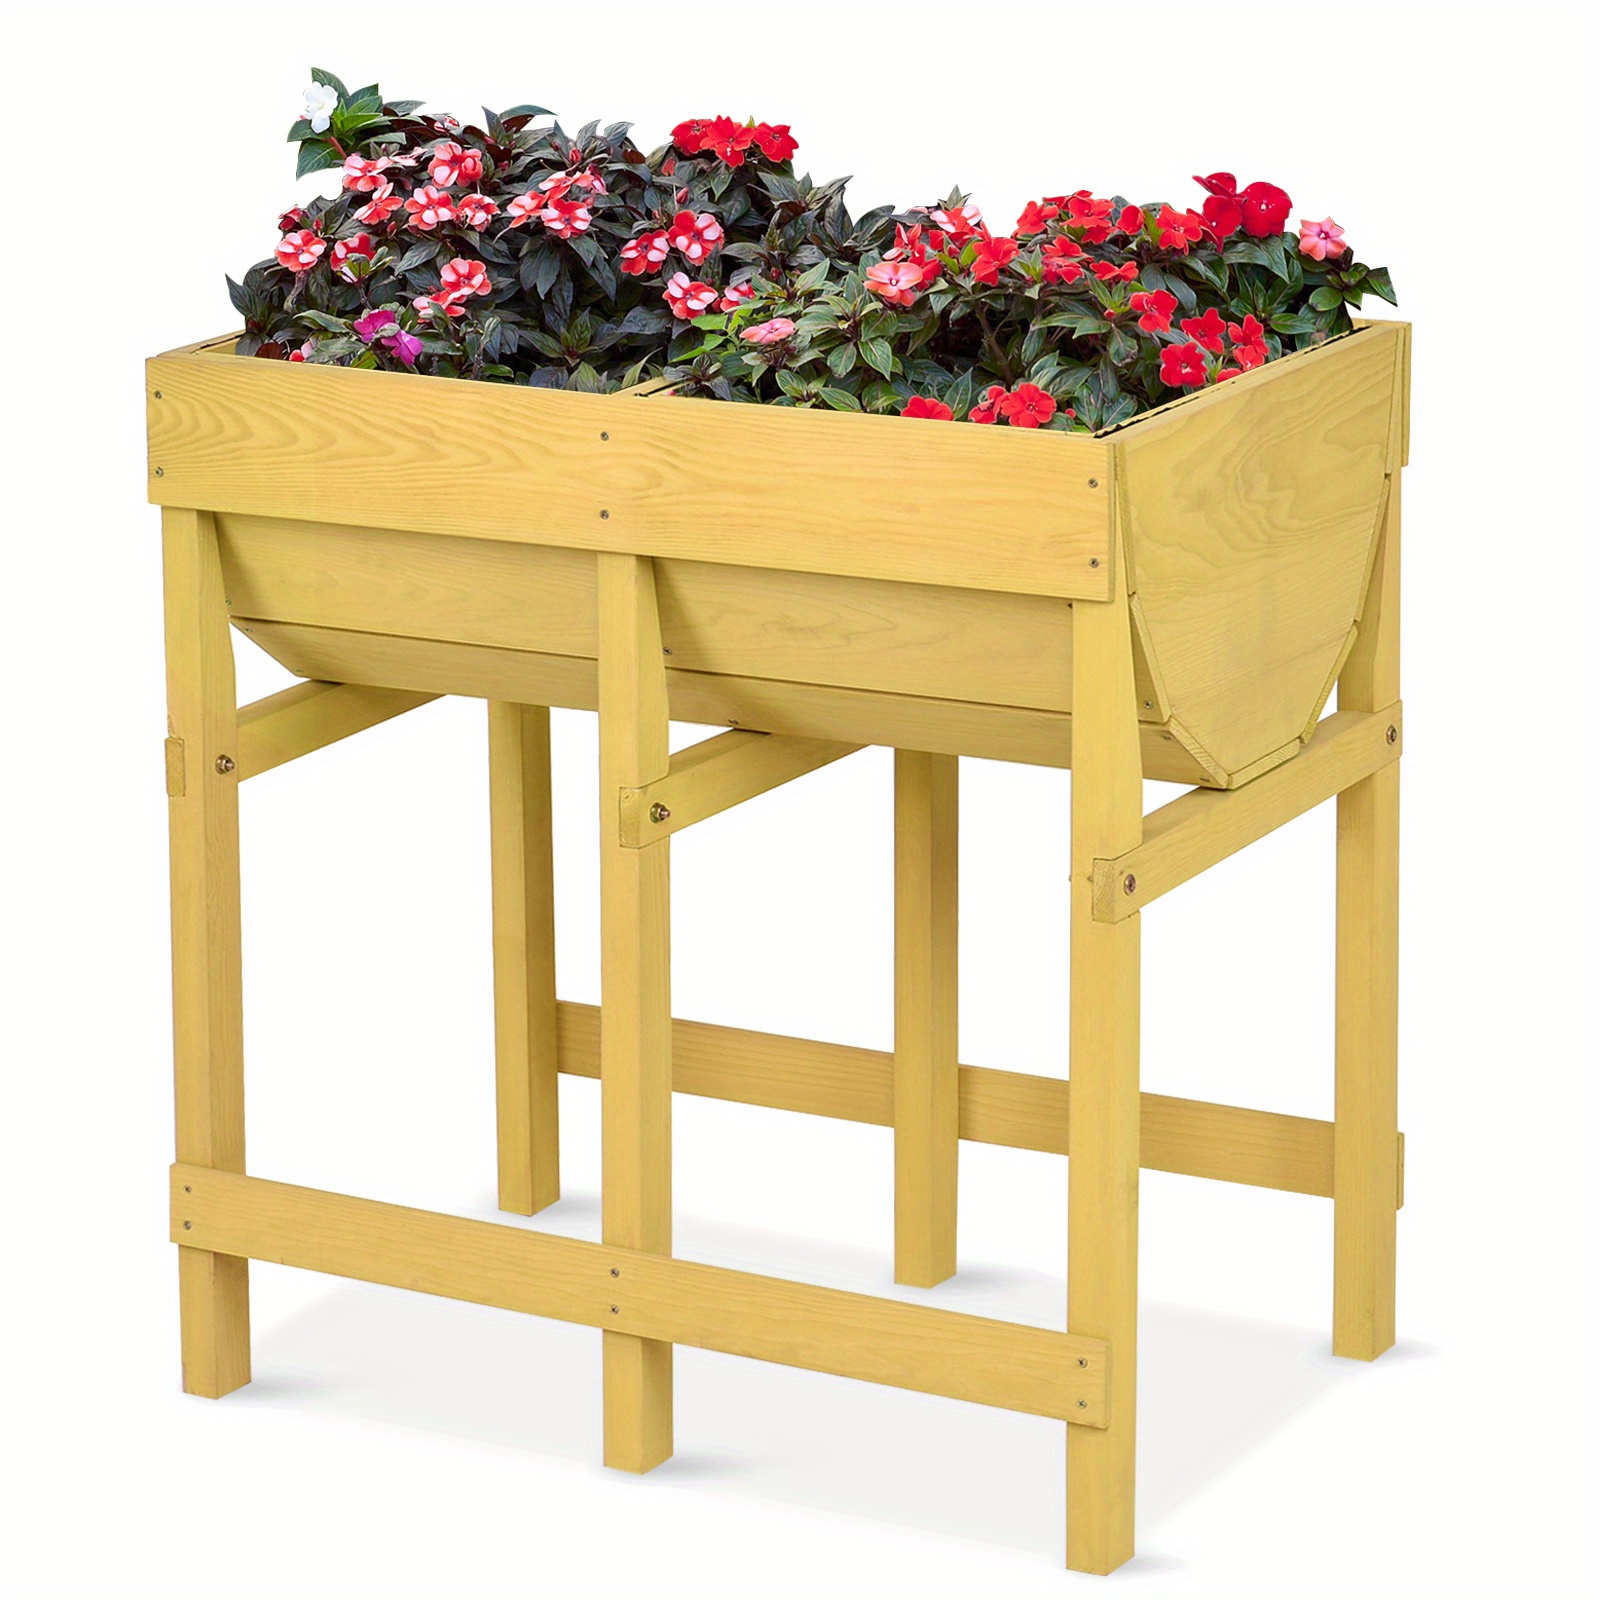 

Maxmass Wooden Raised V Planter Elevated Vegetable Flower Bed Planting Free Standing